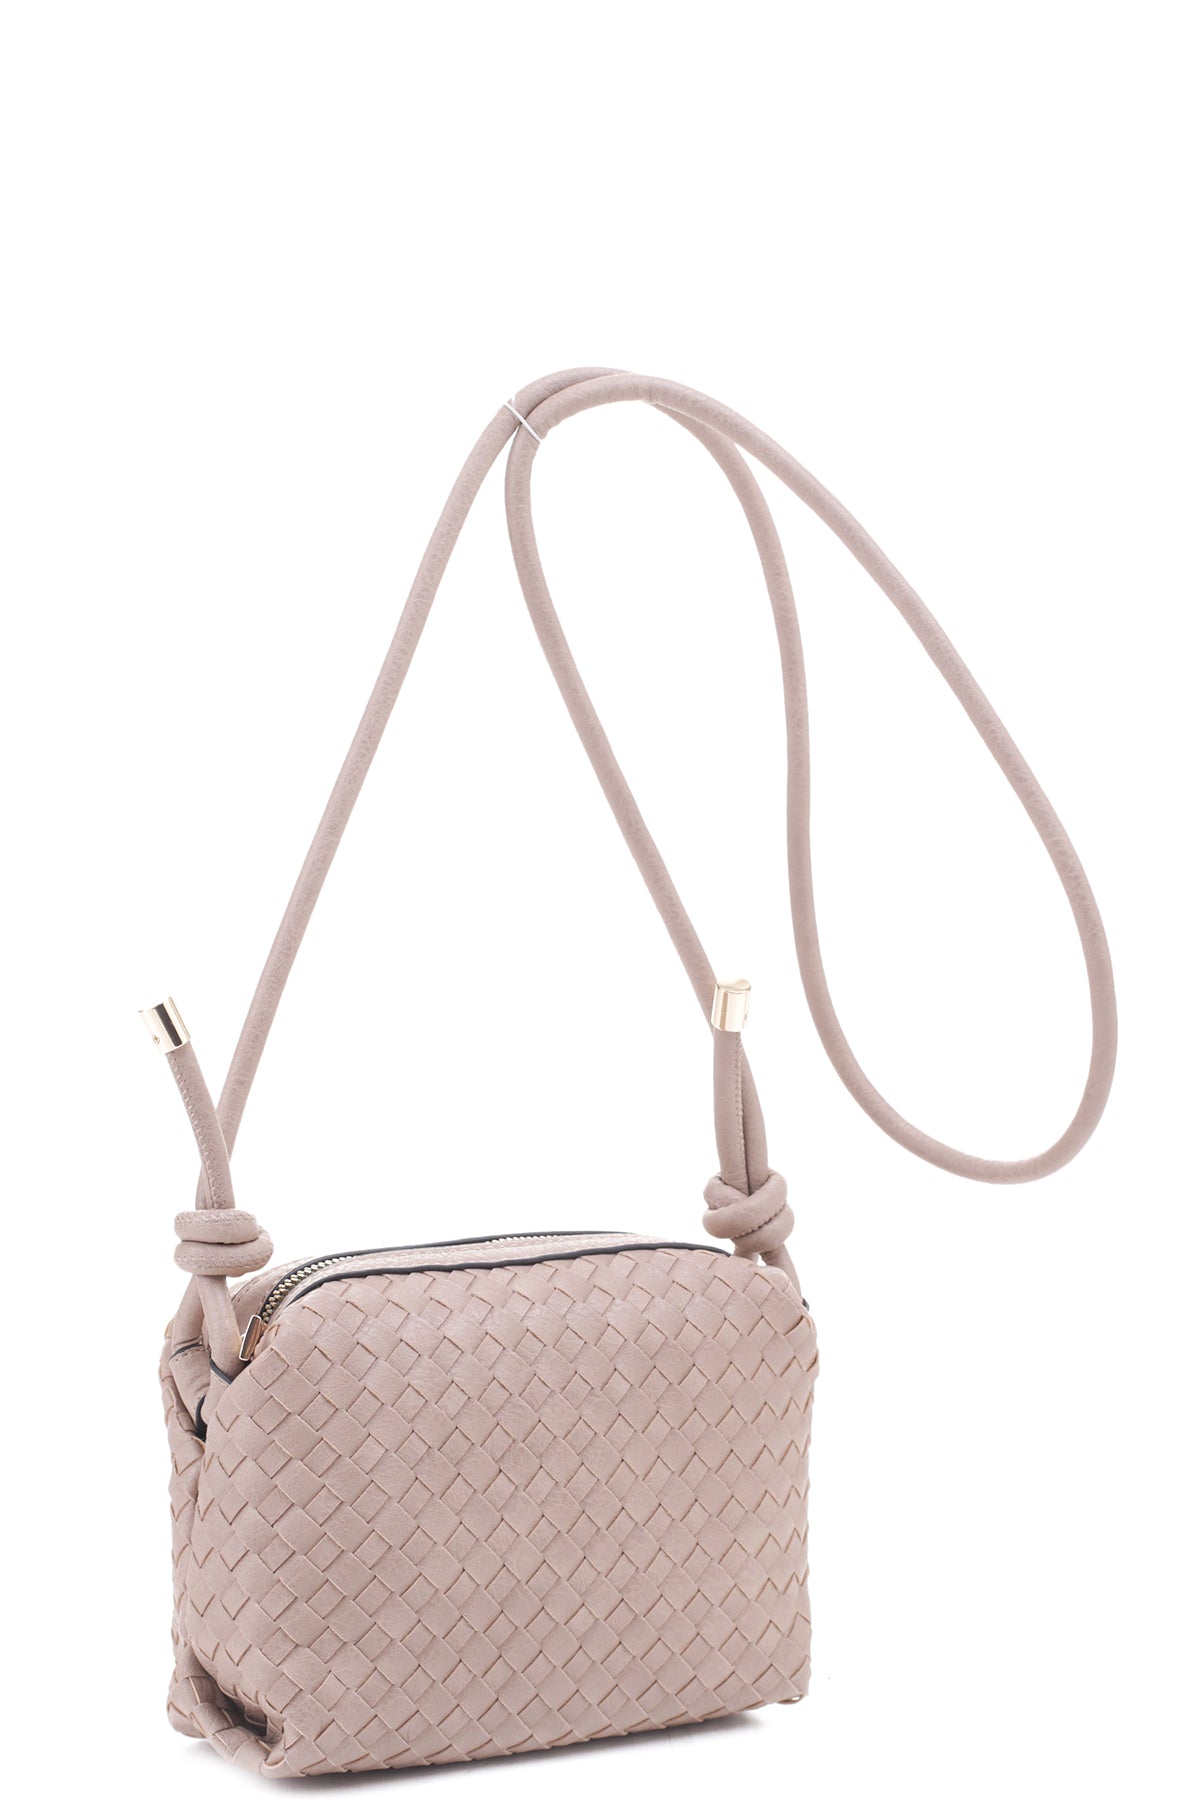 Braid Texture Zipper Crossbody Bag | ACCESSORIES, Black, Blue, Blush, Brown, CCPRODUCTS, HANDBAGS, Ivory, SALE, SALE ACCESSORIES, Stone, Taupe | Style Your Curves